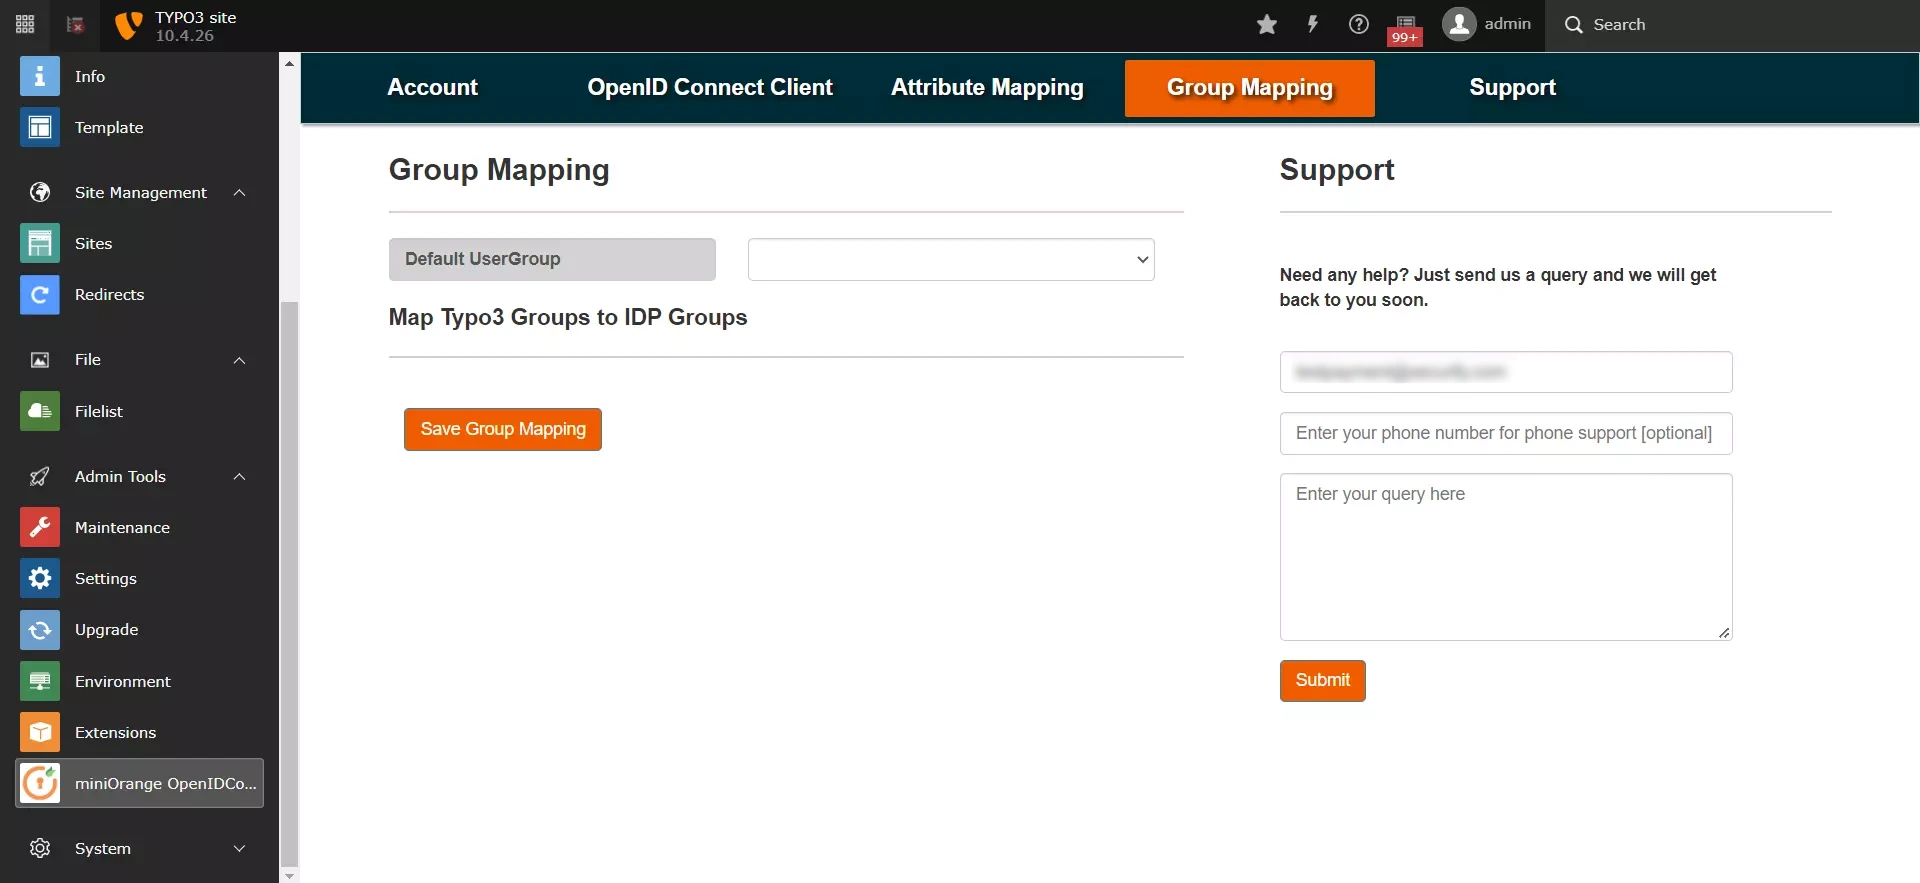 WHMCS Typo3 SSO - WHMCS Single Sign-On(SSO) Login in Typo3 - role mapping